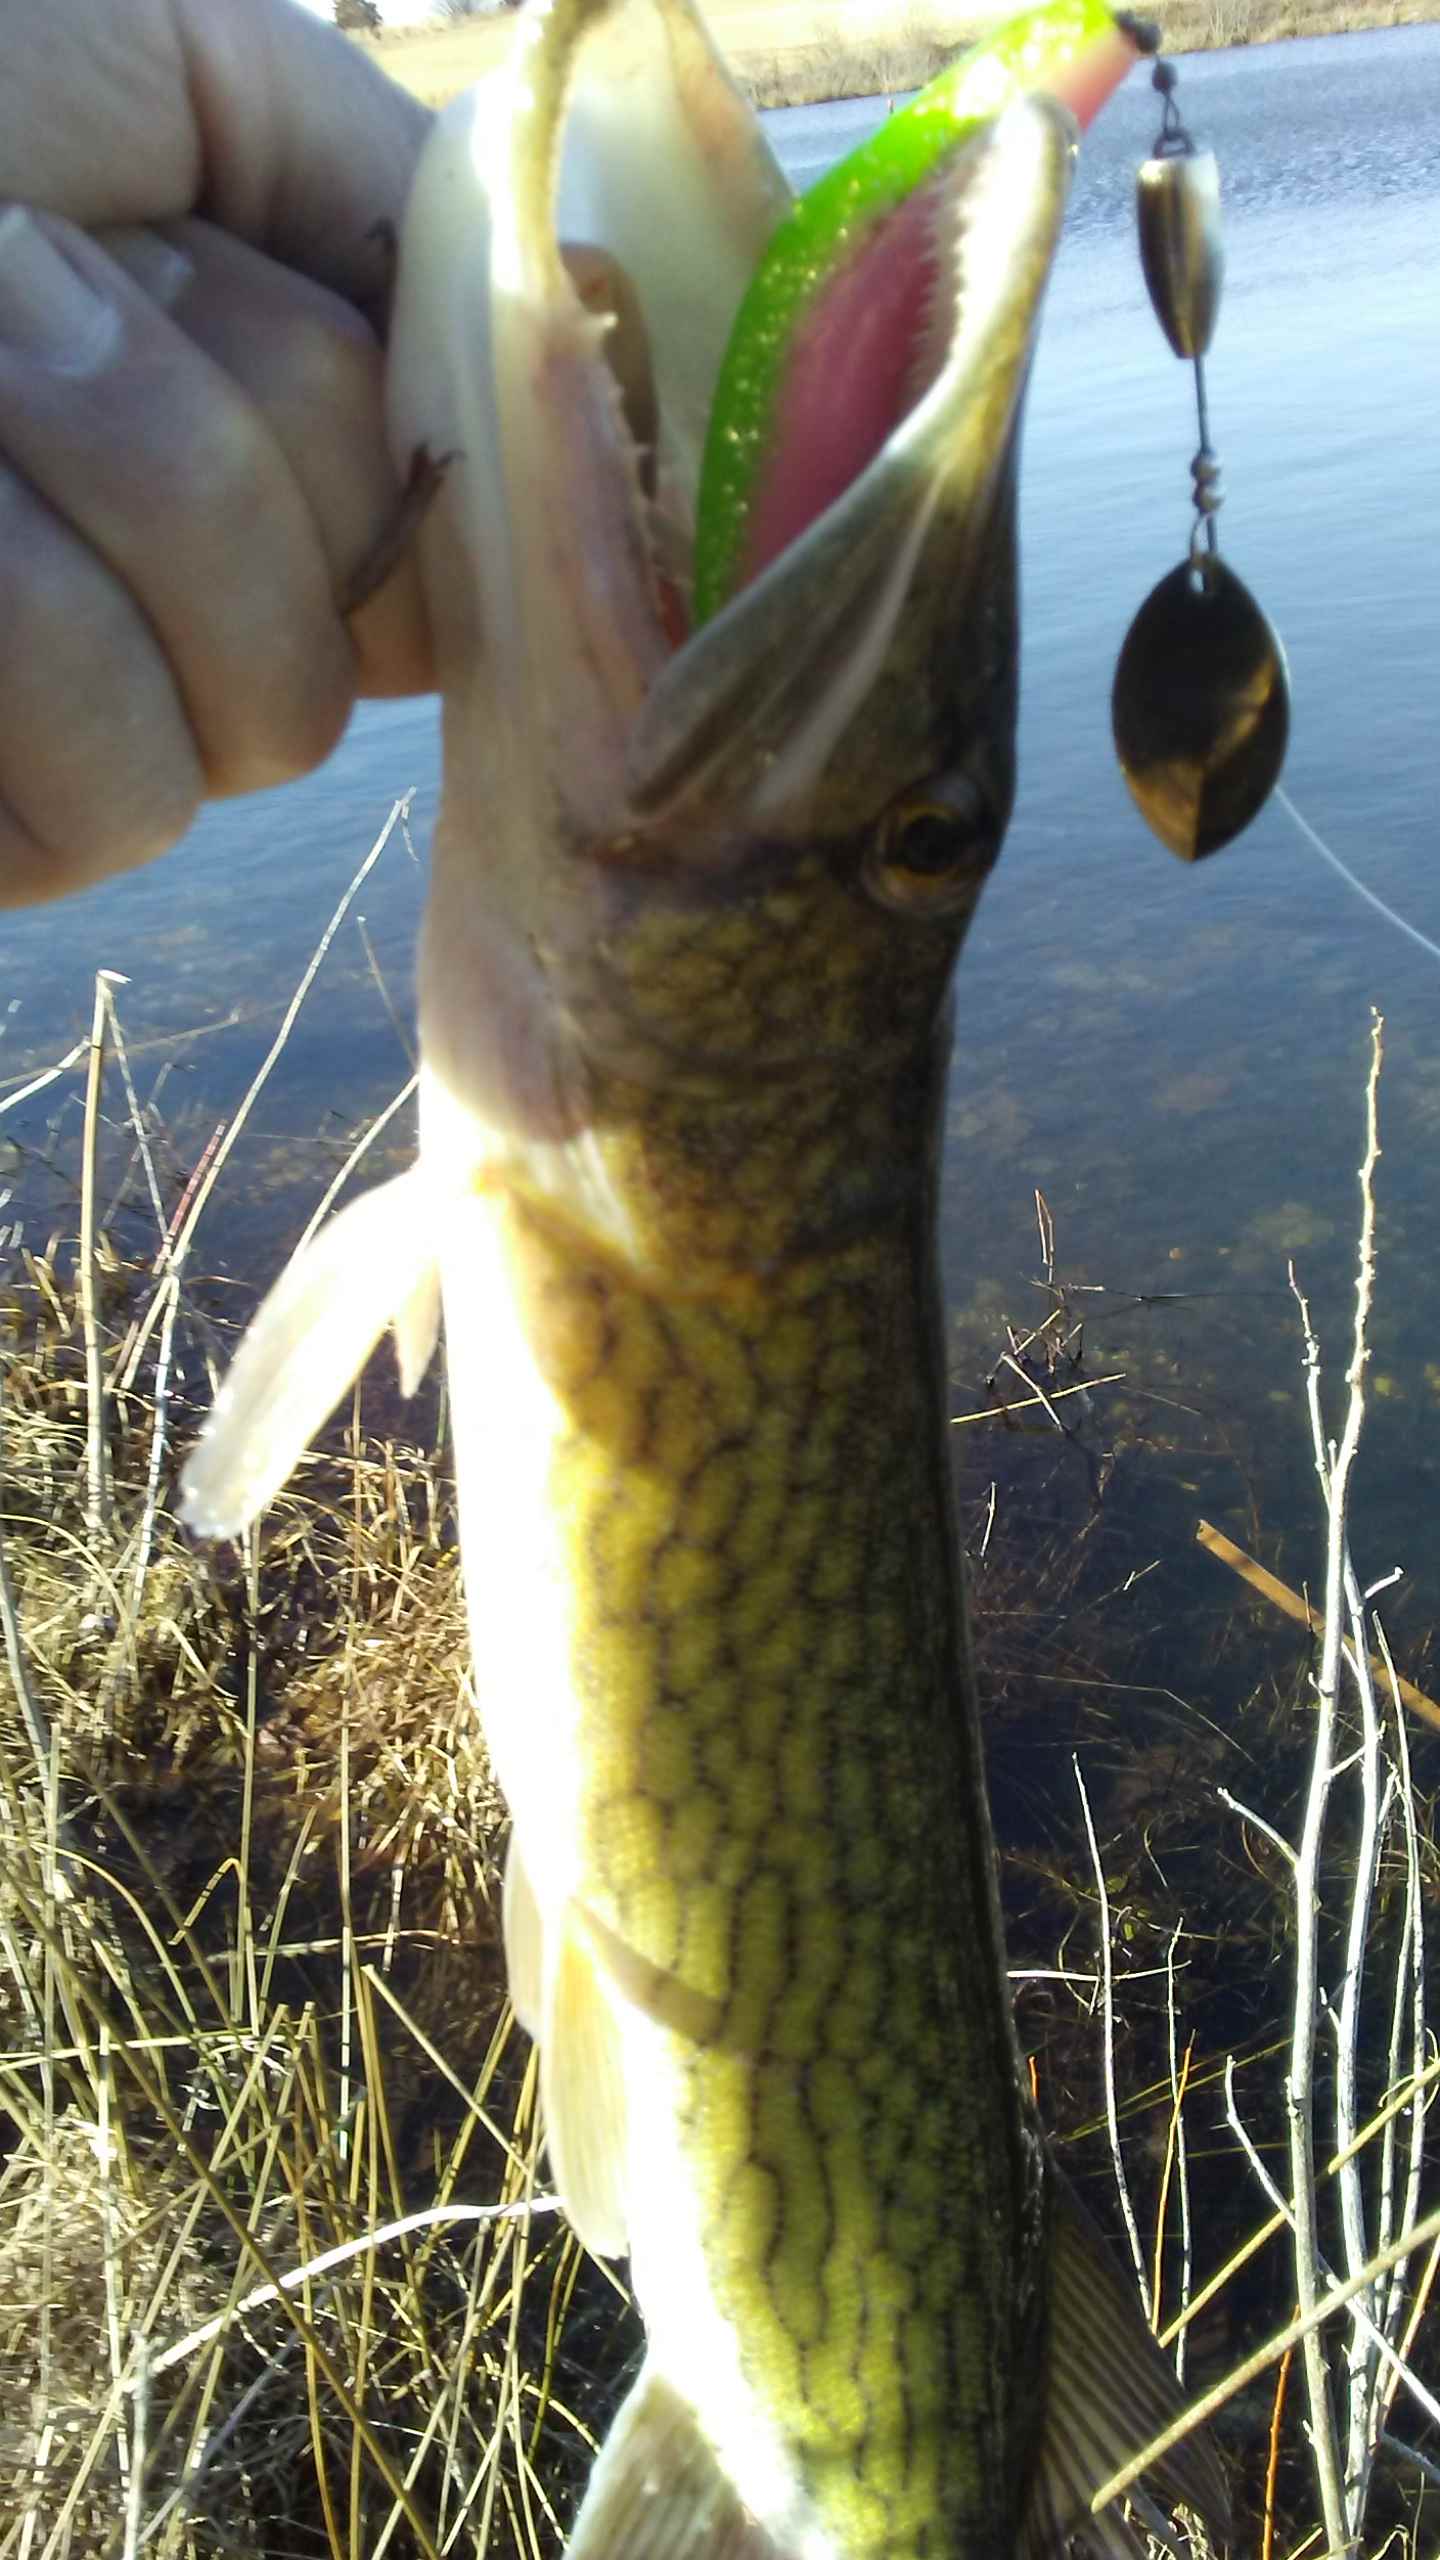 Tips on pickerel fishing? - Other Fish Species - Bass Fishing Forums